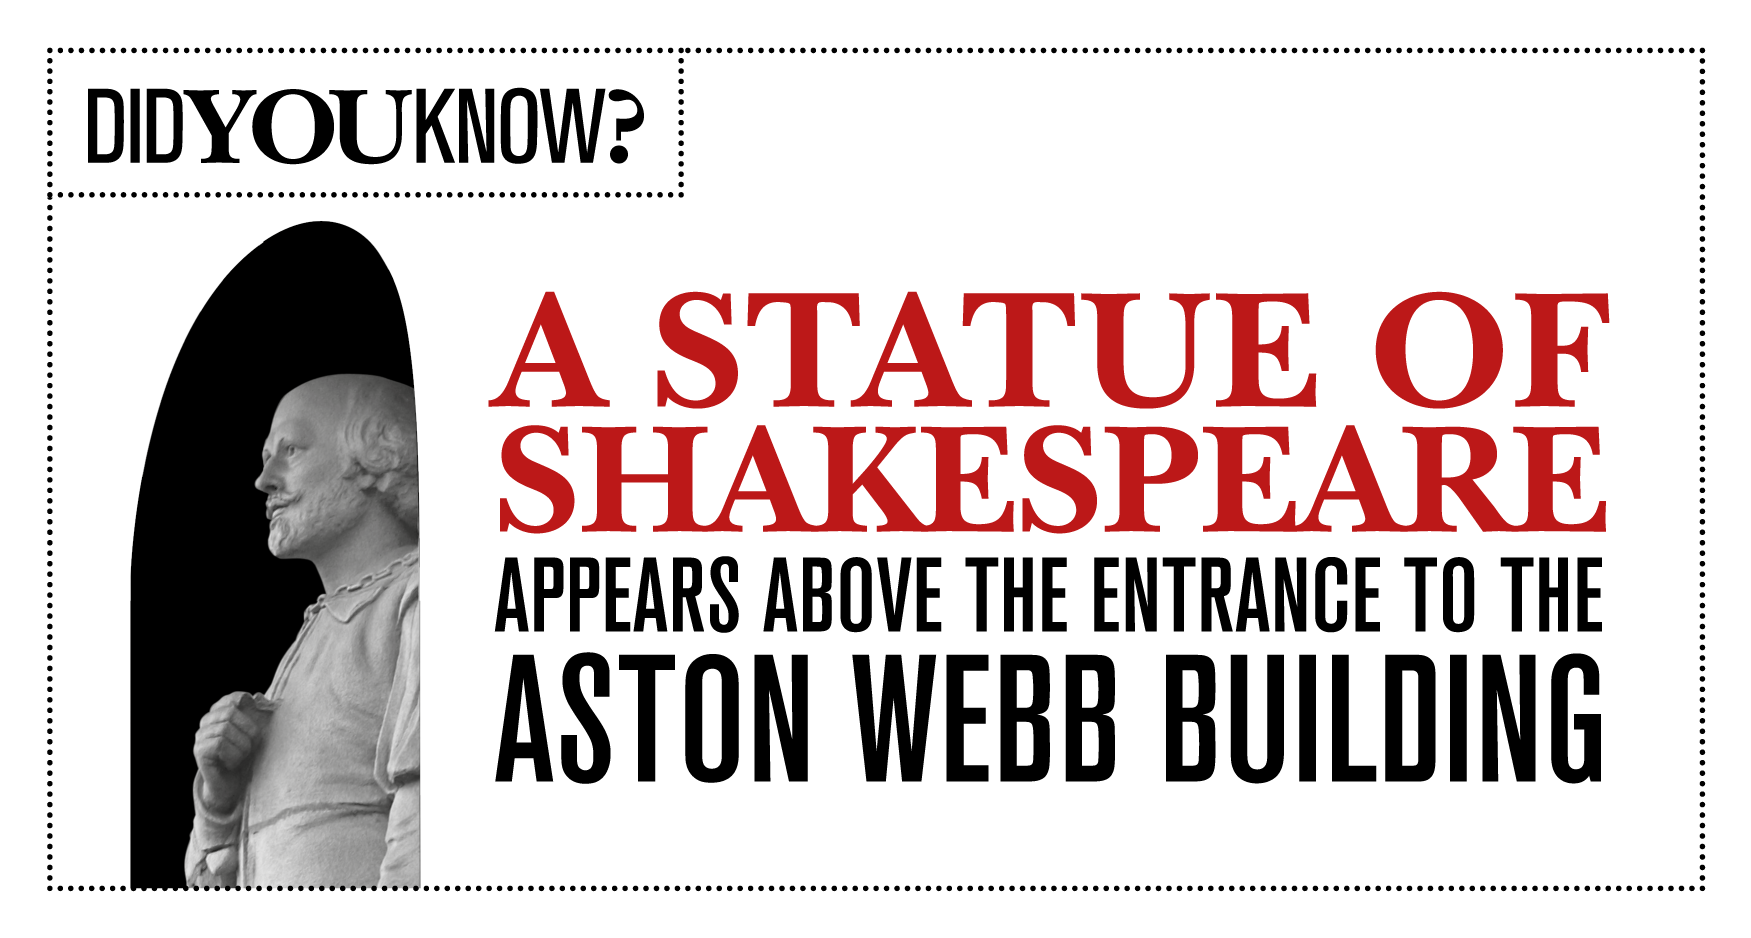 Did you know? A statue of Shakespeare appears above the entrance to the Aston Webb building